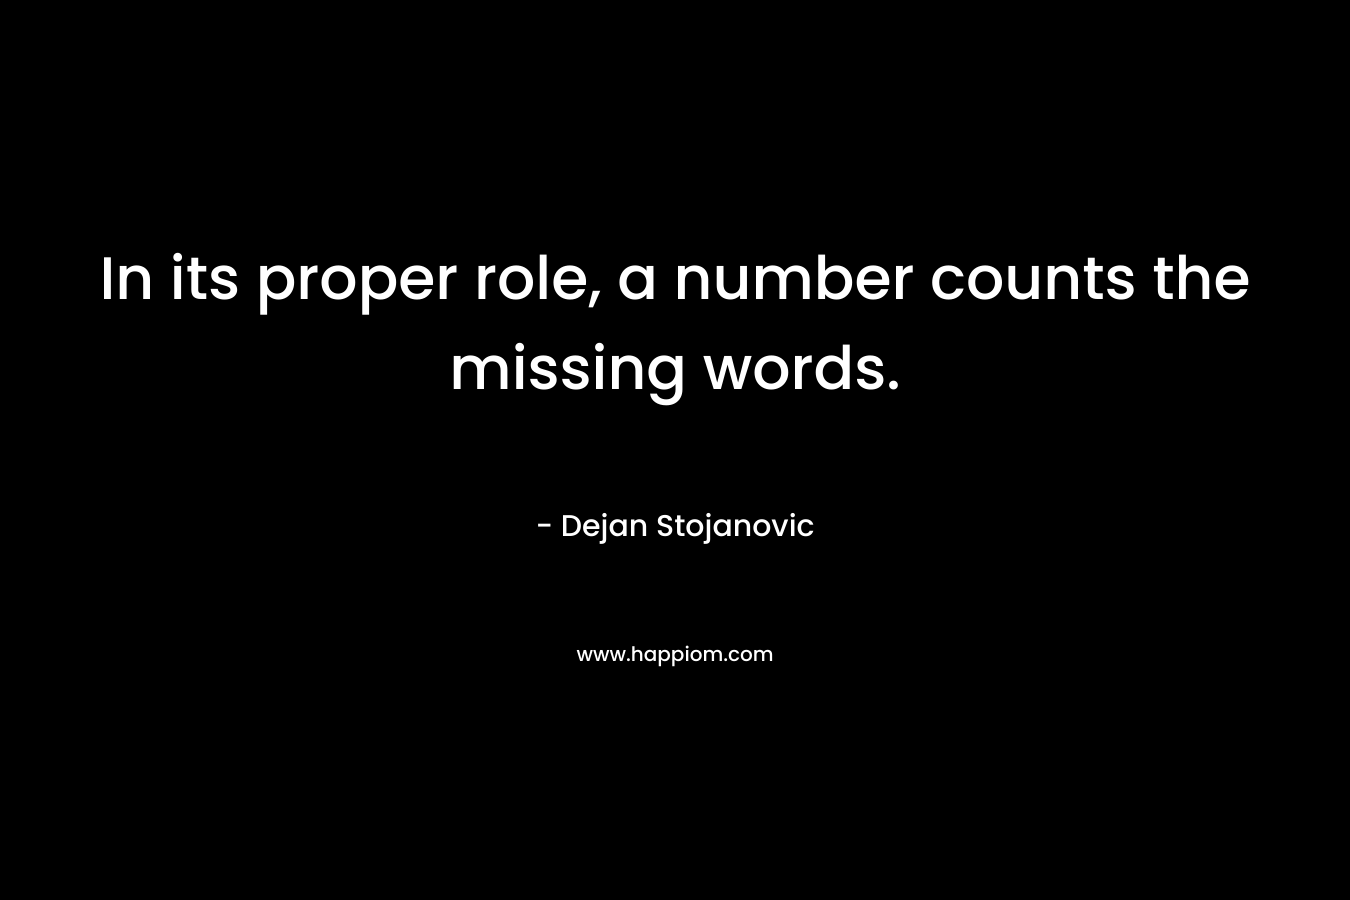 In its proper role, a number counts the missing words.